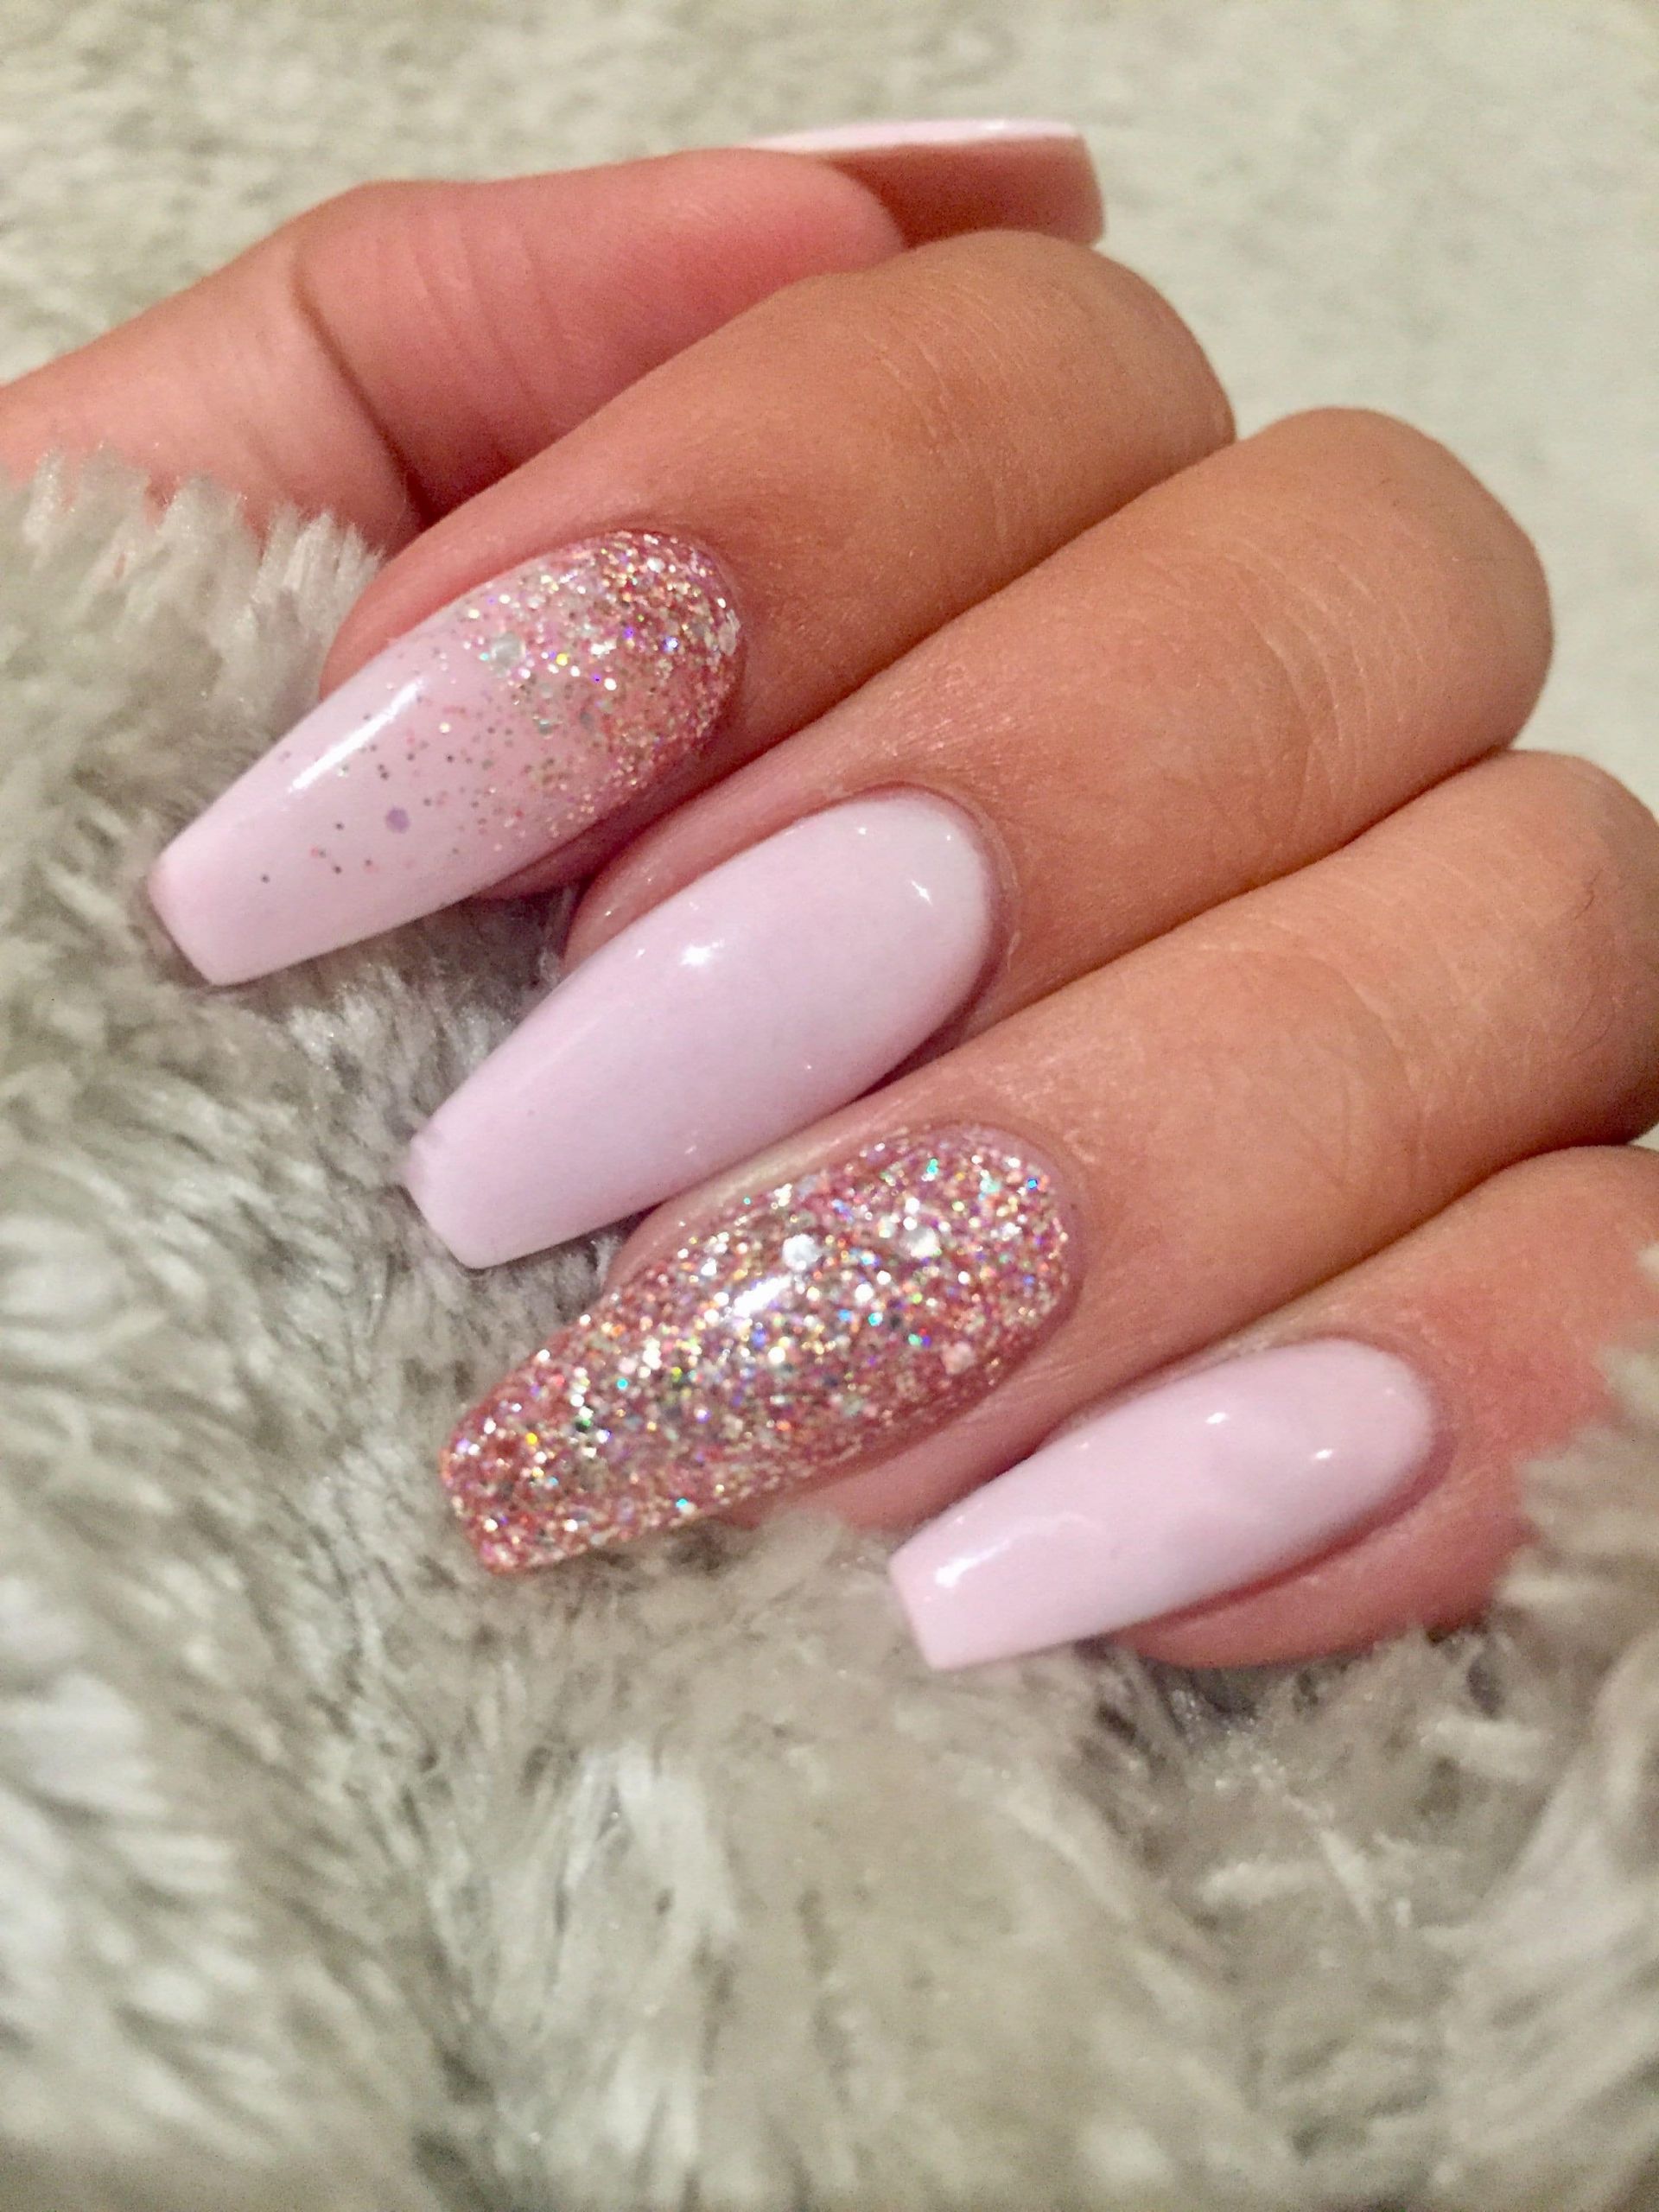 Light Pink Nails With Gold Glitter
 7 Fresh Acrylic Nail Designs Matte Light Oink and Gold